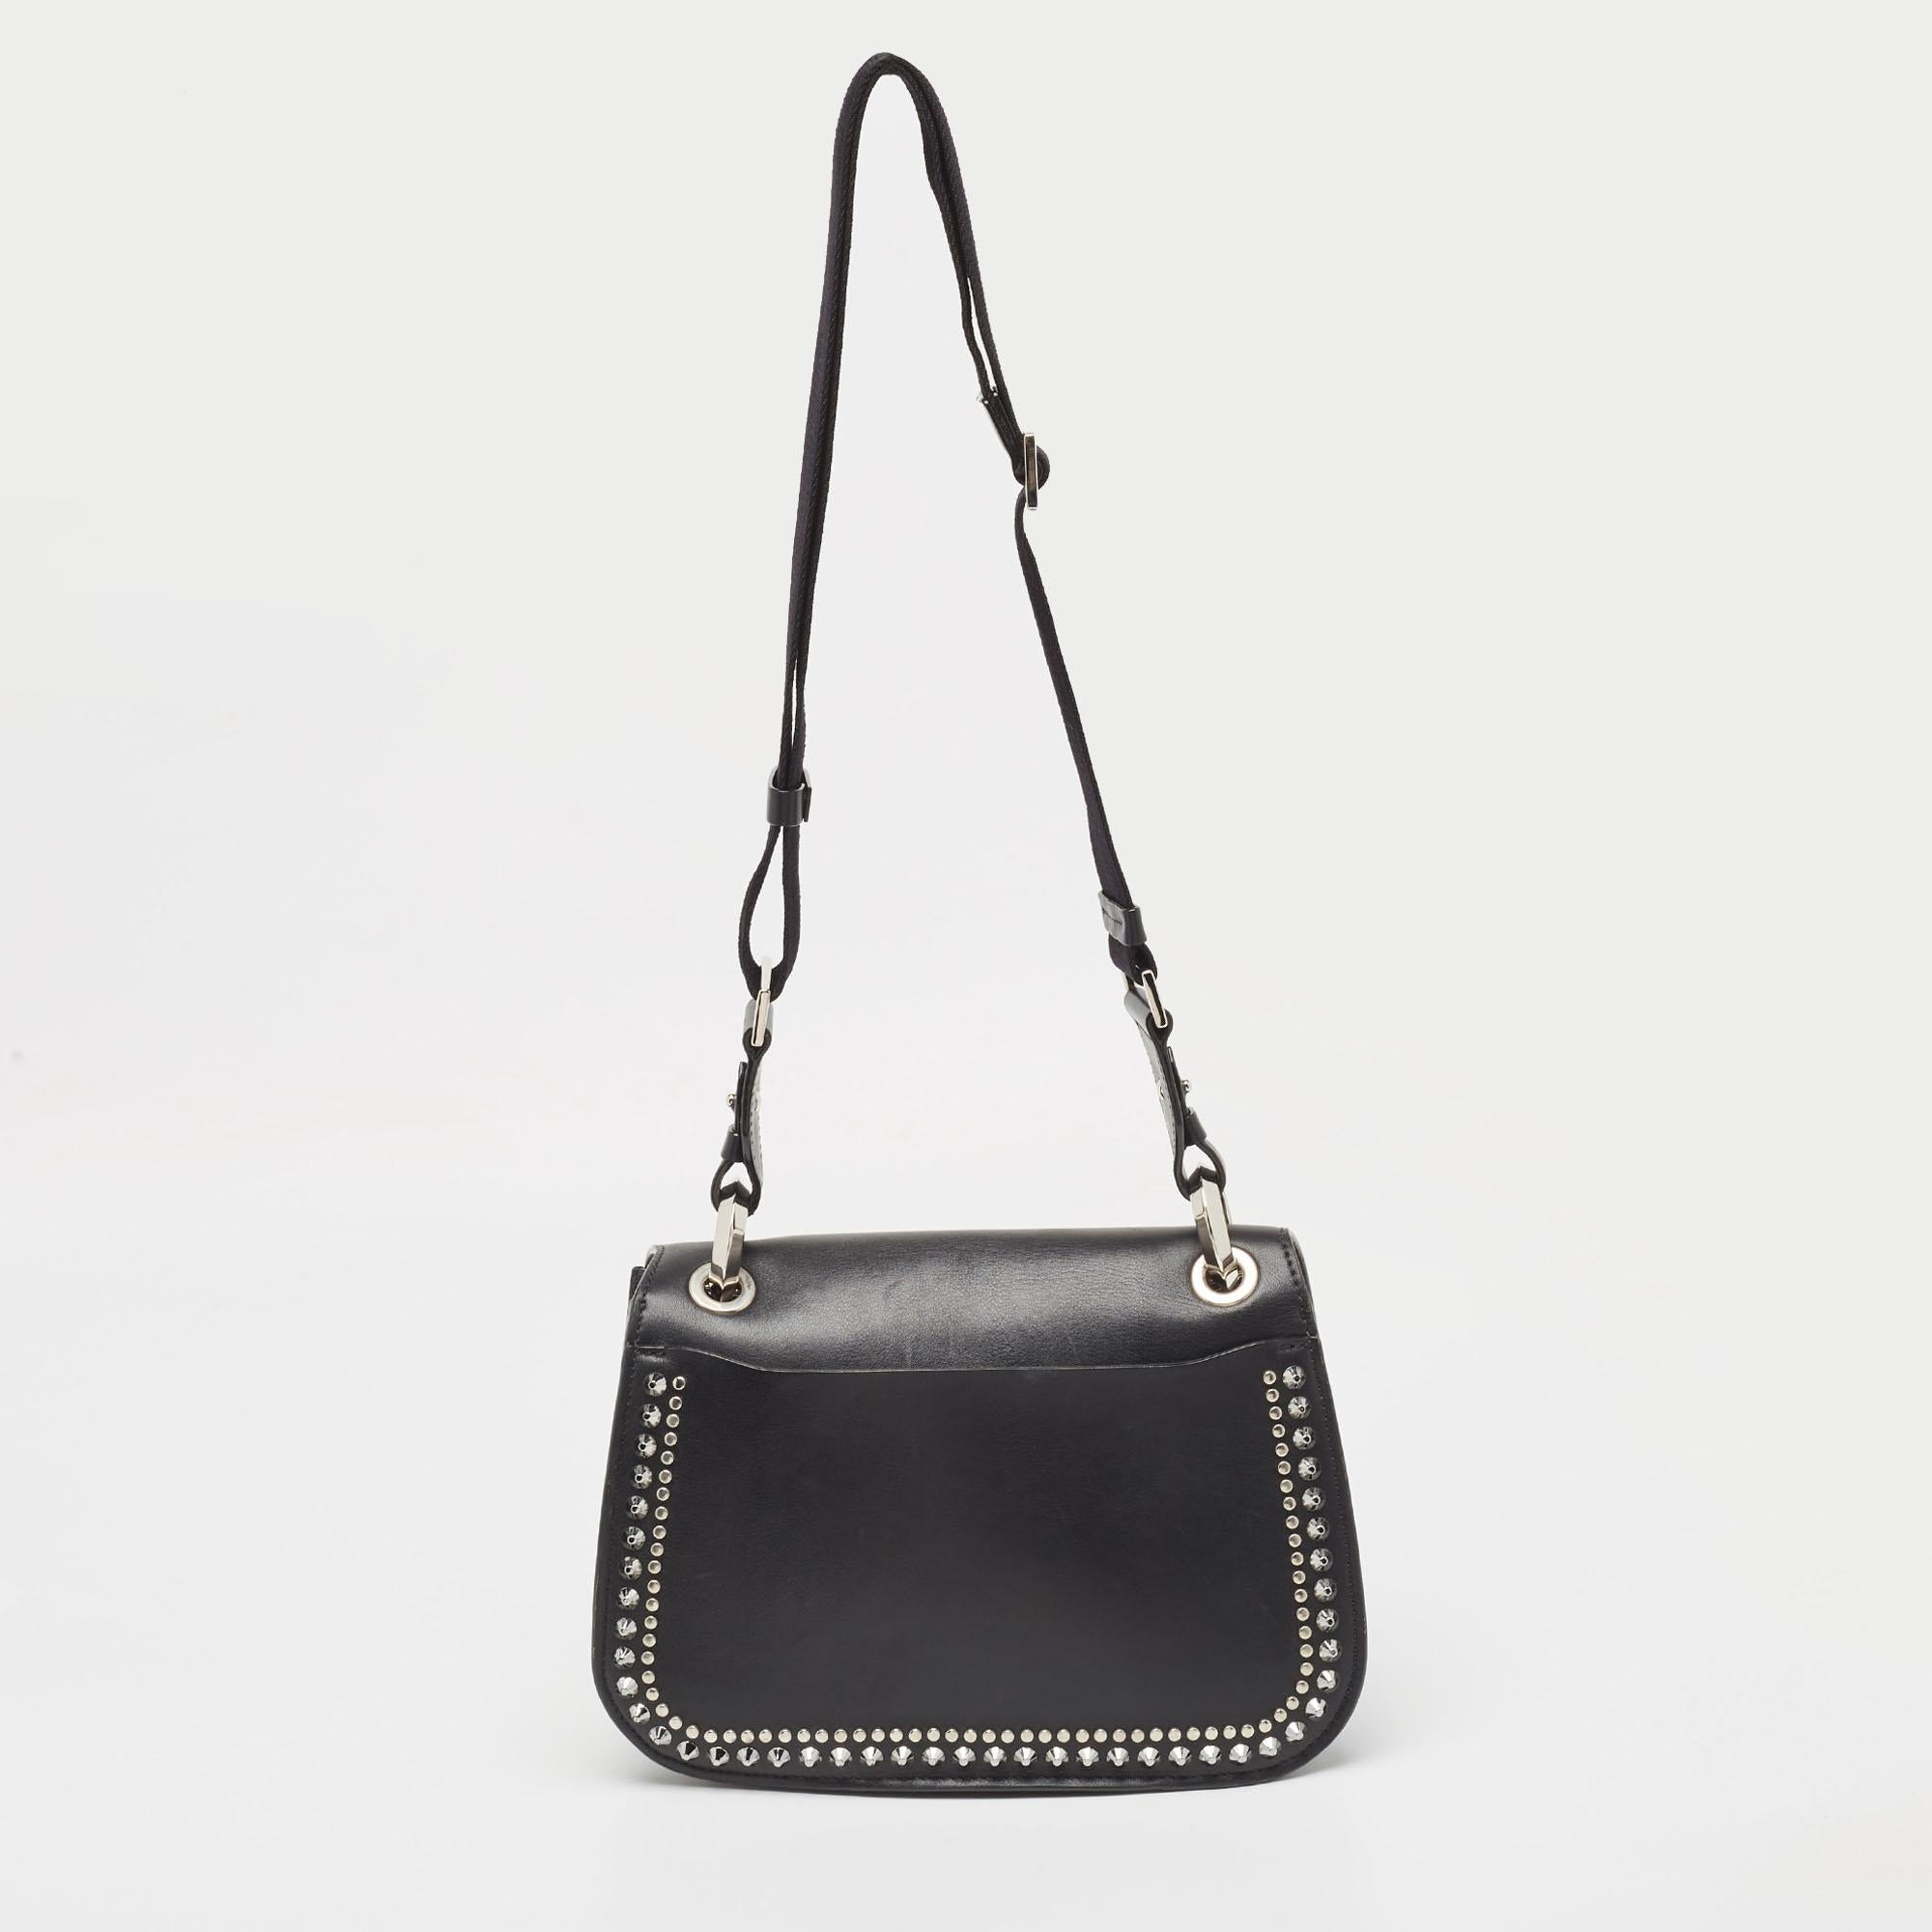 Express your personal style with this high-end crossbody bag. Crafted from quality materials, it has been added with fine details and is finished perfectly. It features a well-sized interior.

Includes: Original Dustbag, Authenticity Card, Info